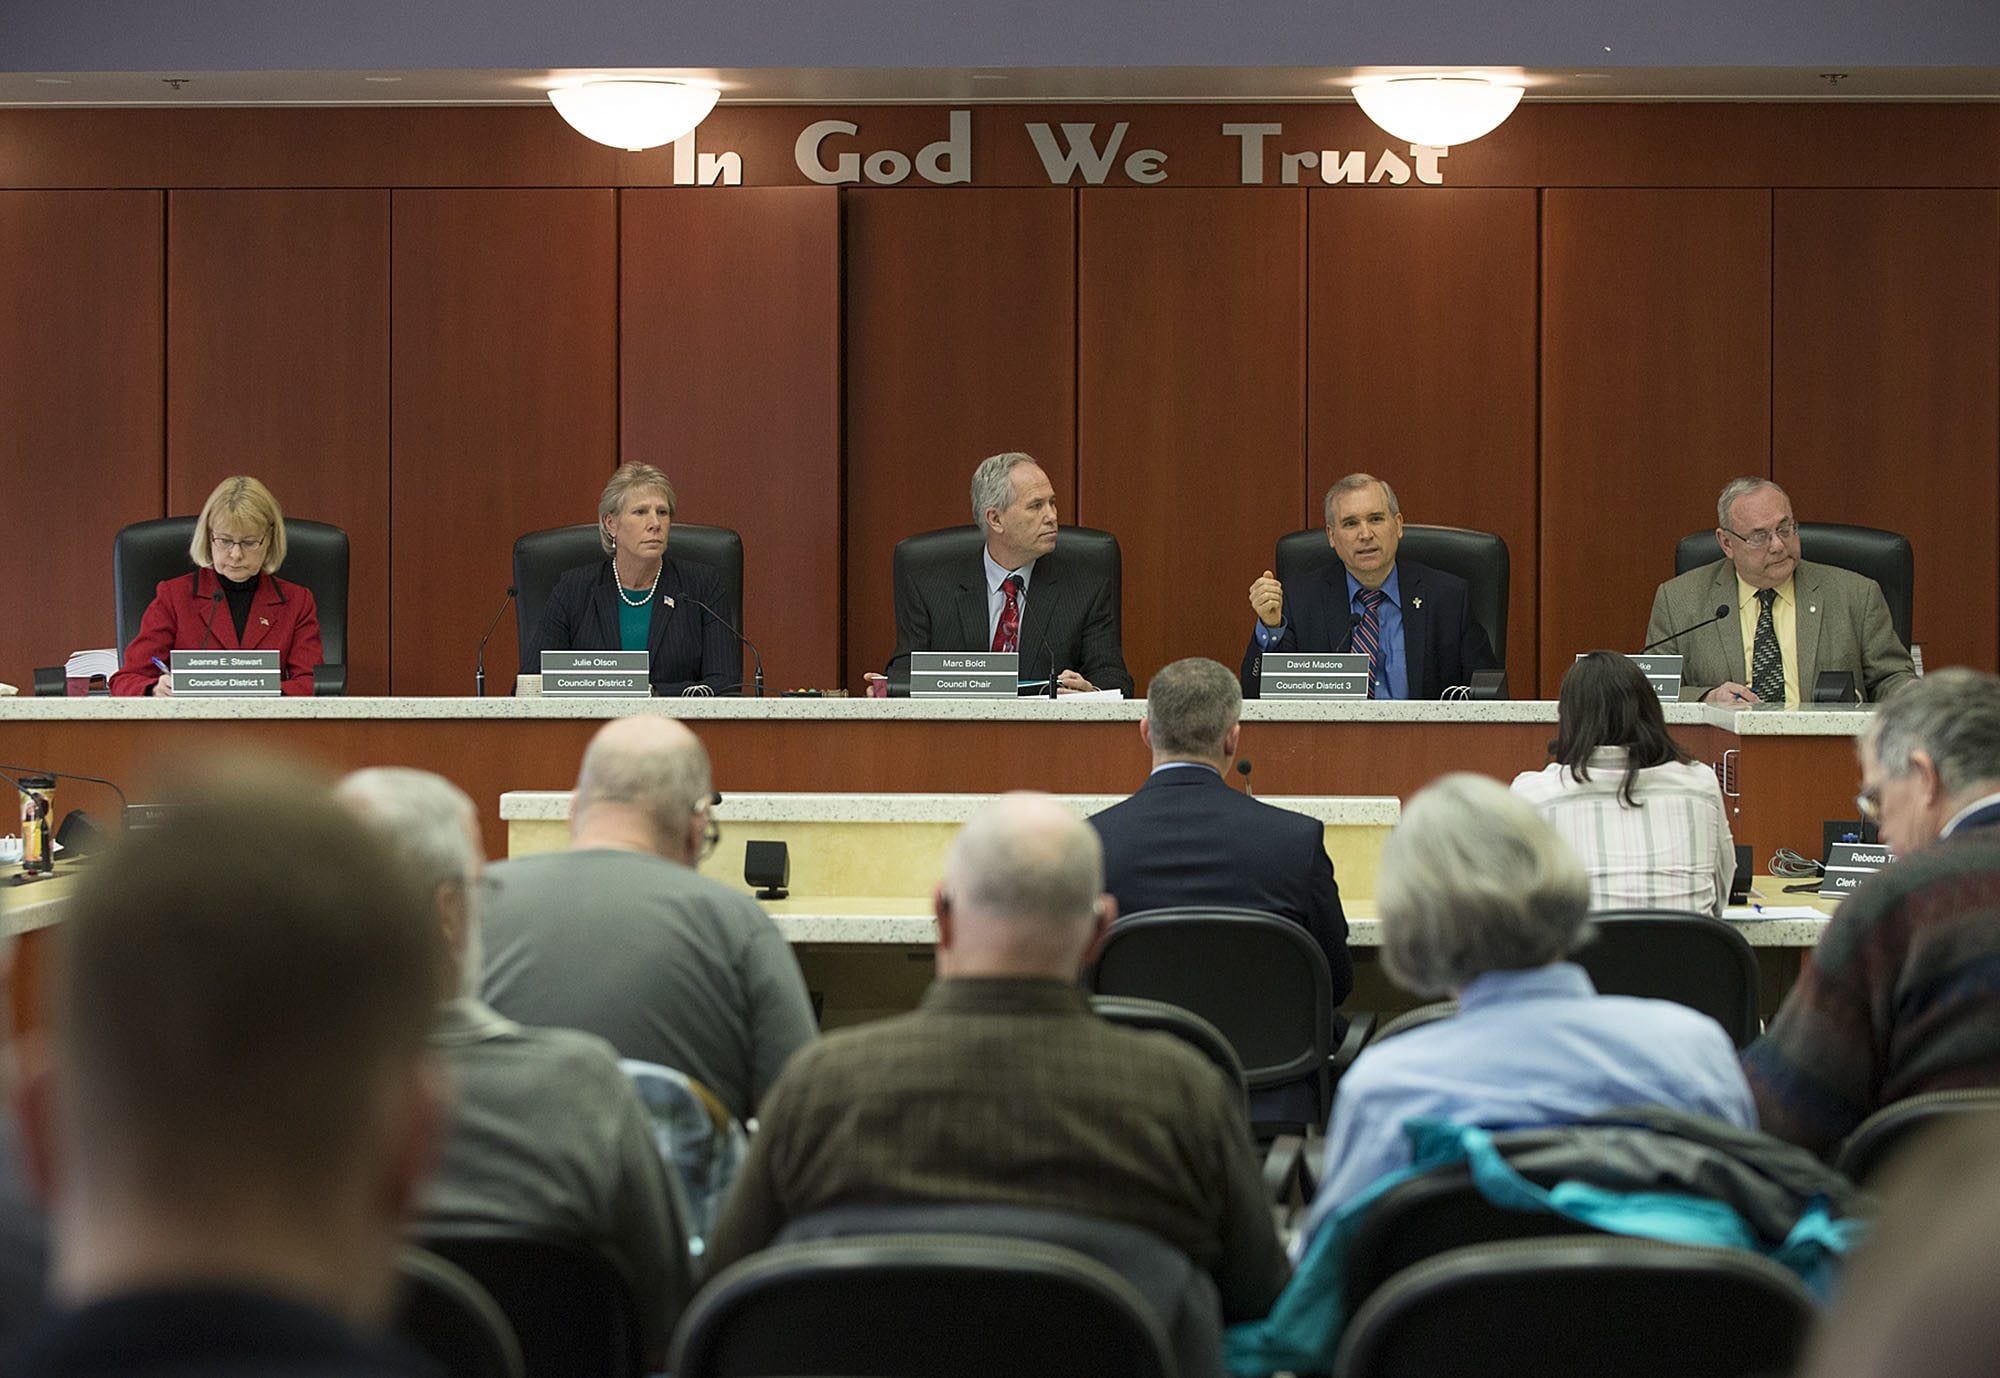 Clark County Councilors, from left, Jeanne Stewart, Julie Olson, Marc Boldt, David Madore and Tom Mielke listen to testimony from local residents on March 22 at the Clark County Public Service Center.